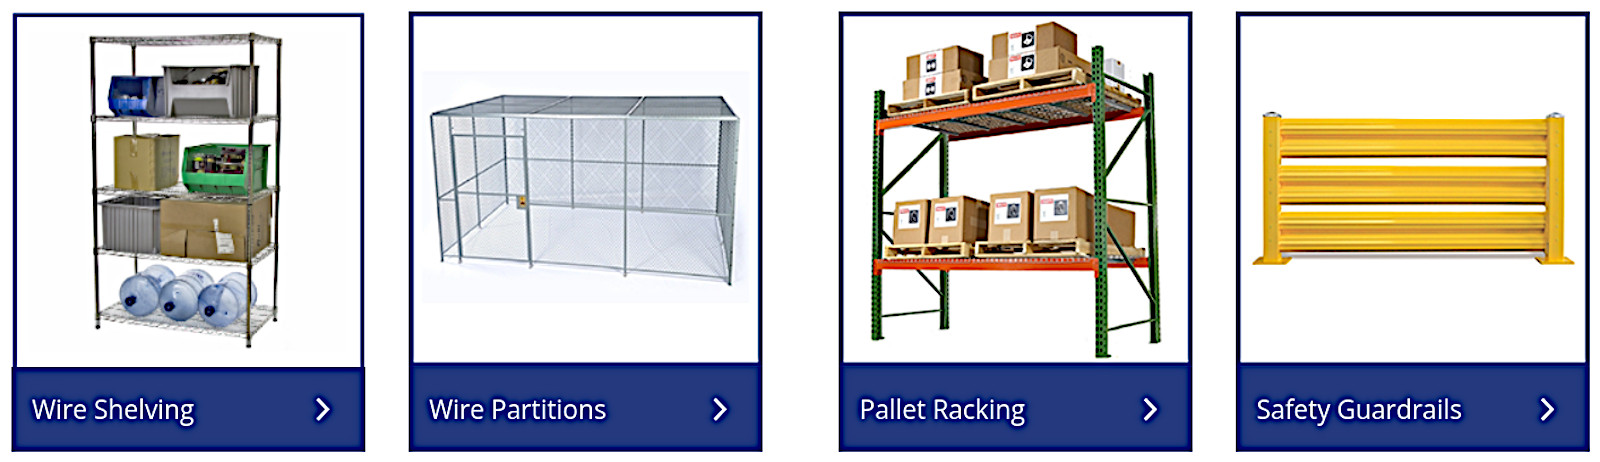 shelves shelving systems at a reduced price